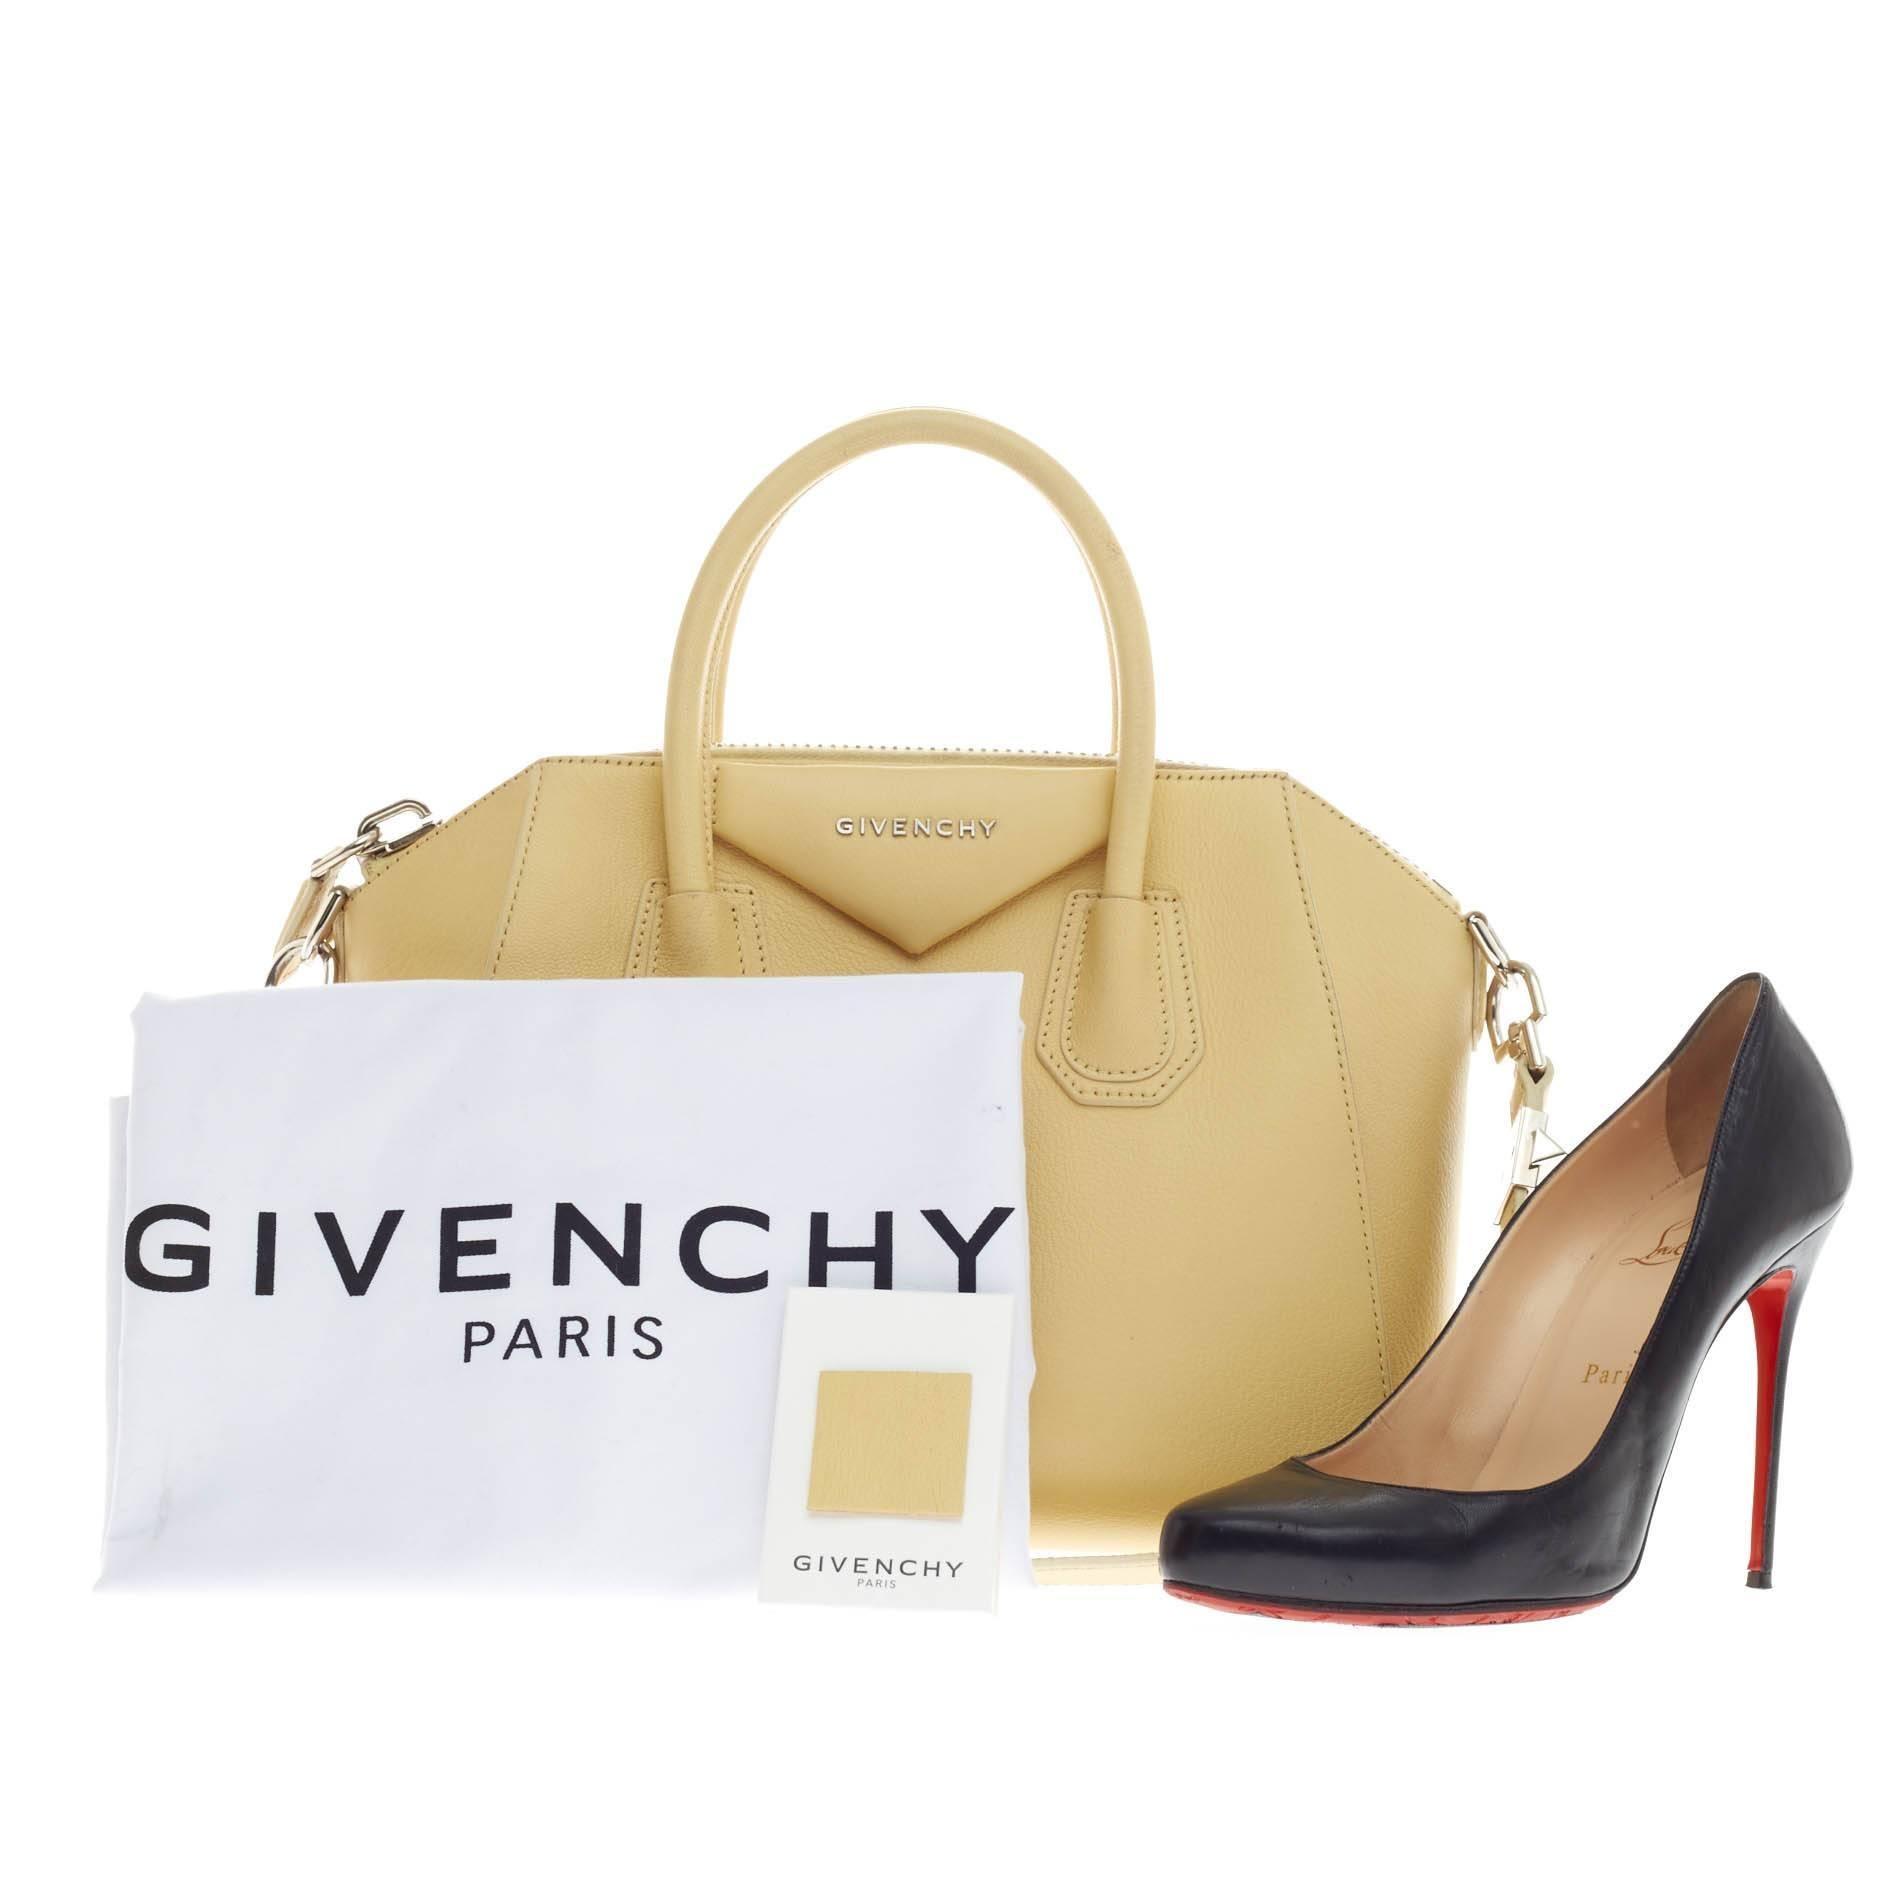 This authentic Givenchy Antigona Bag Leather Small is a go-to fashionista favorite. Constructed in beautiful pale yellow leather, this structured yet stylish tote features Givenchy's signature envelope fold logo in front, dual top handles,